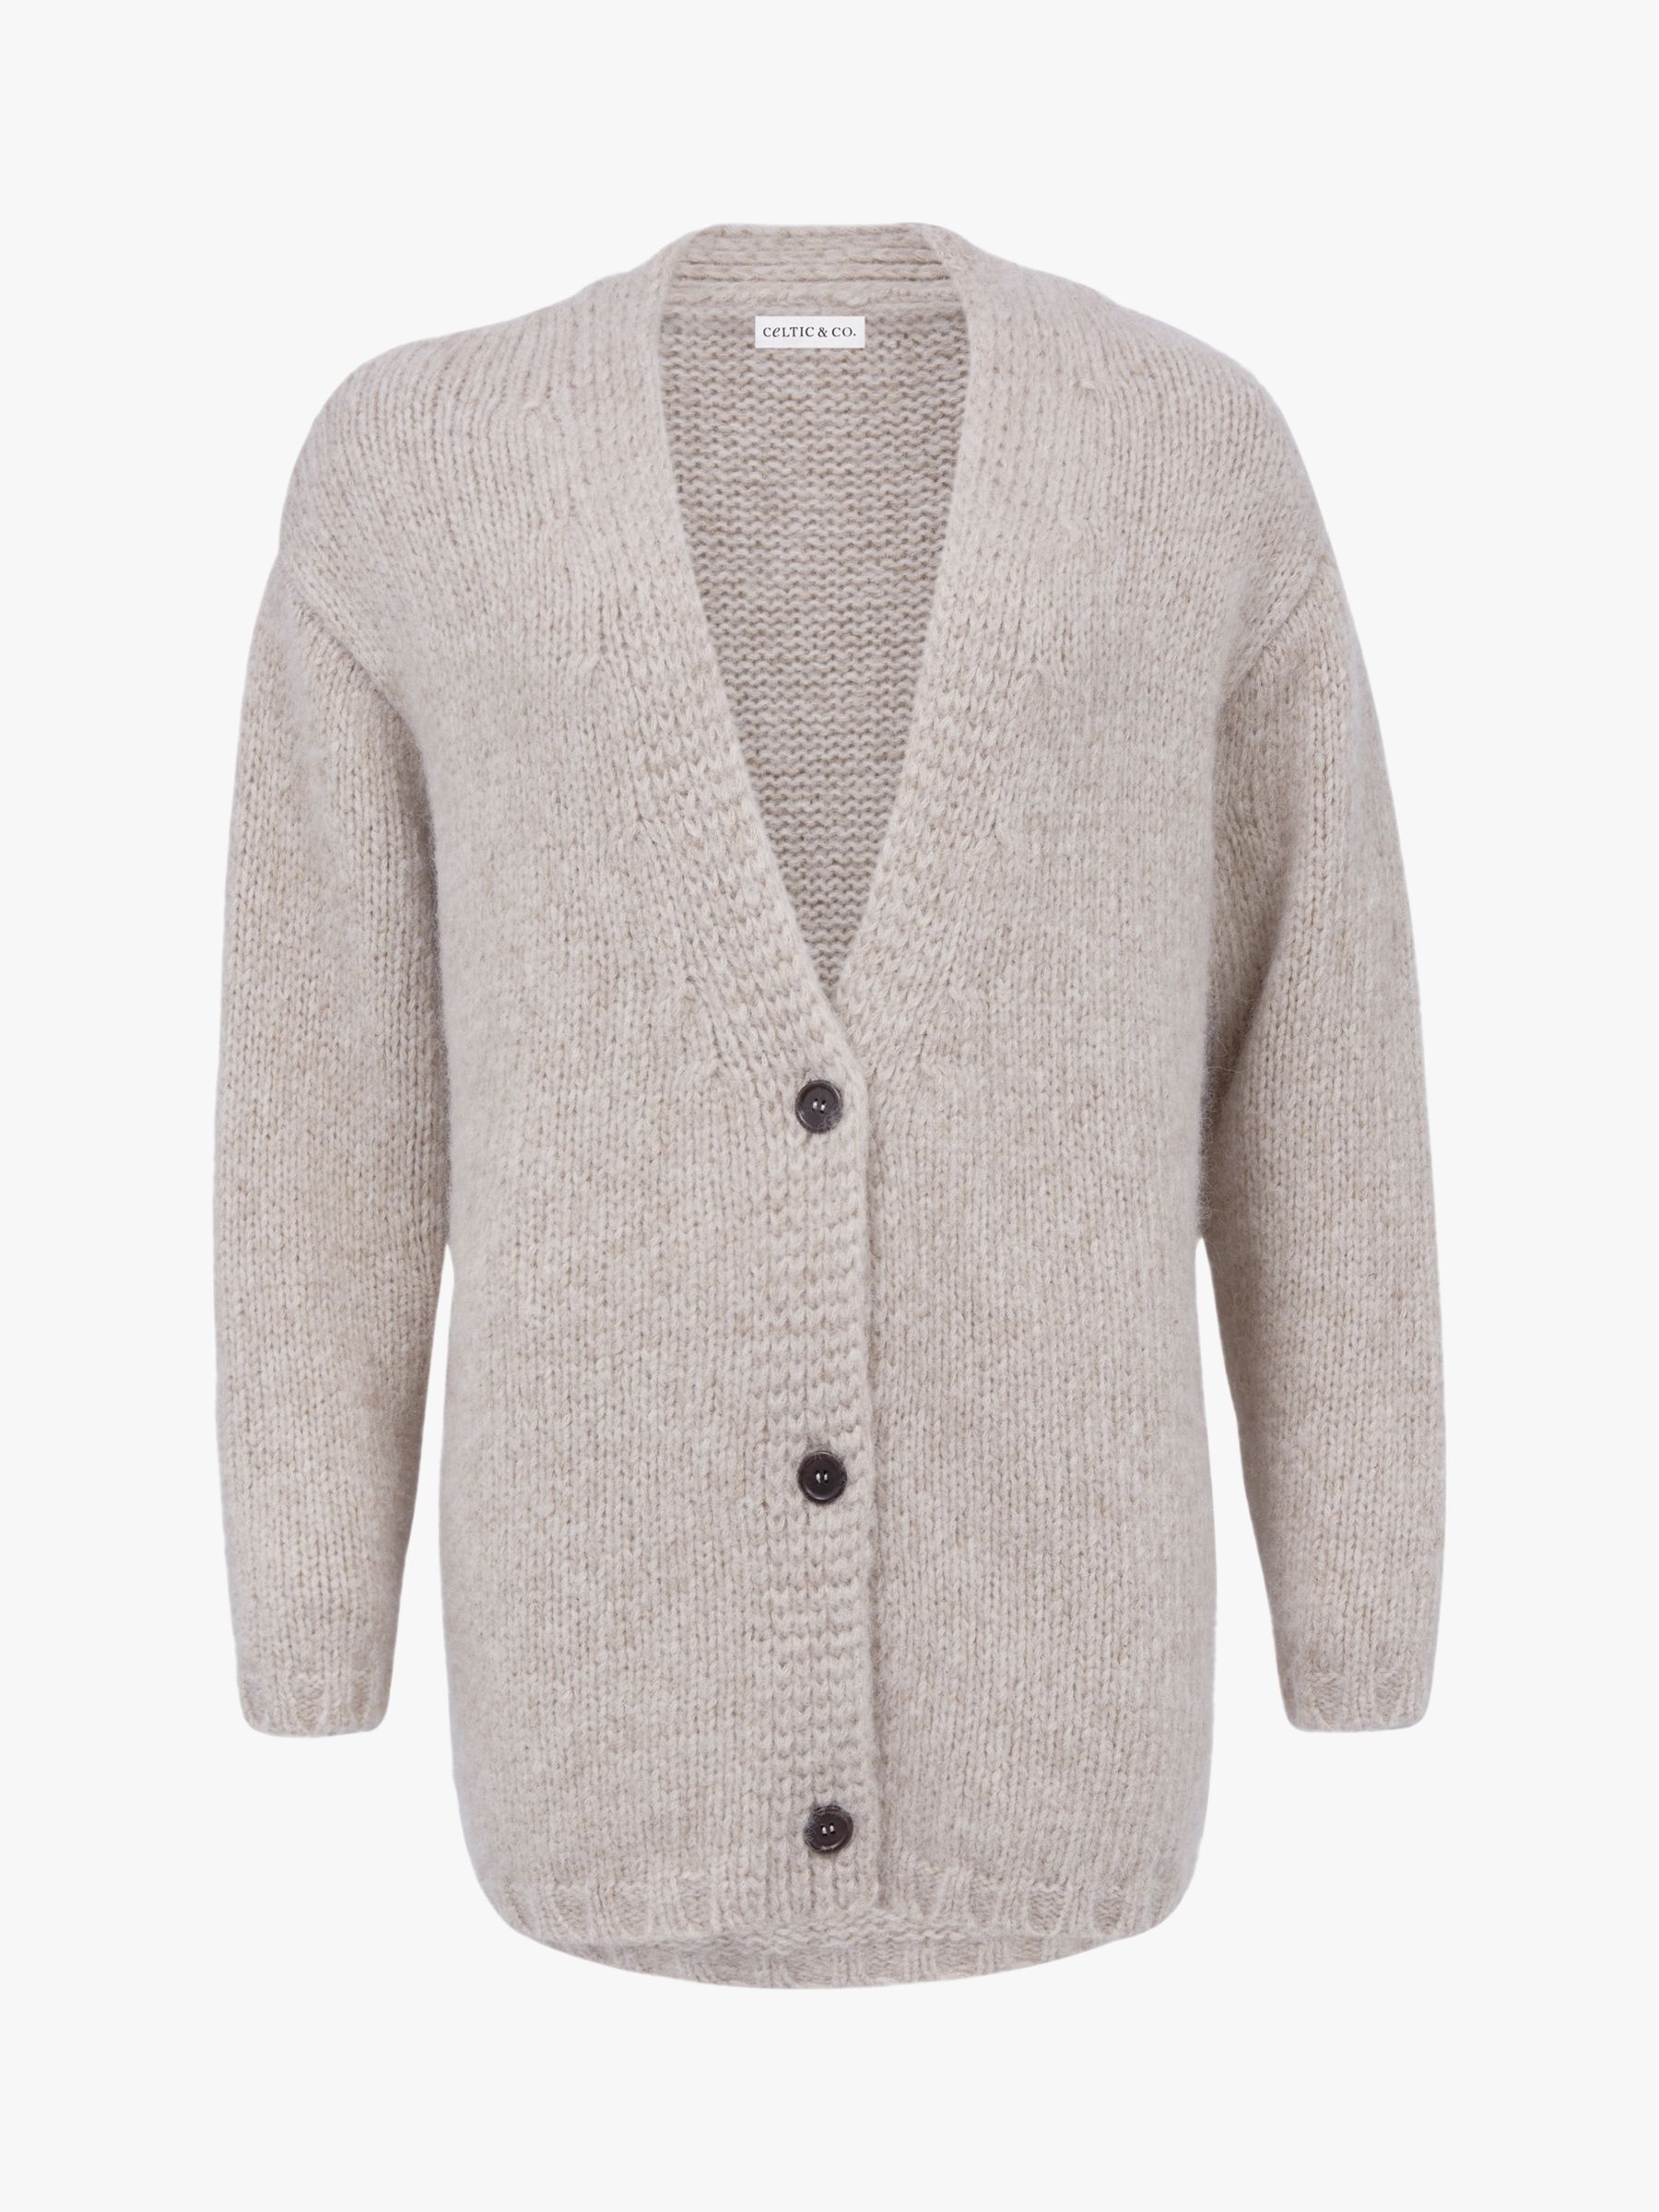 Buy Celtic & Co. Luxe Wool Blend Slouch Cardigan, Oatmeal Online at johnlewis.com